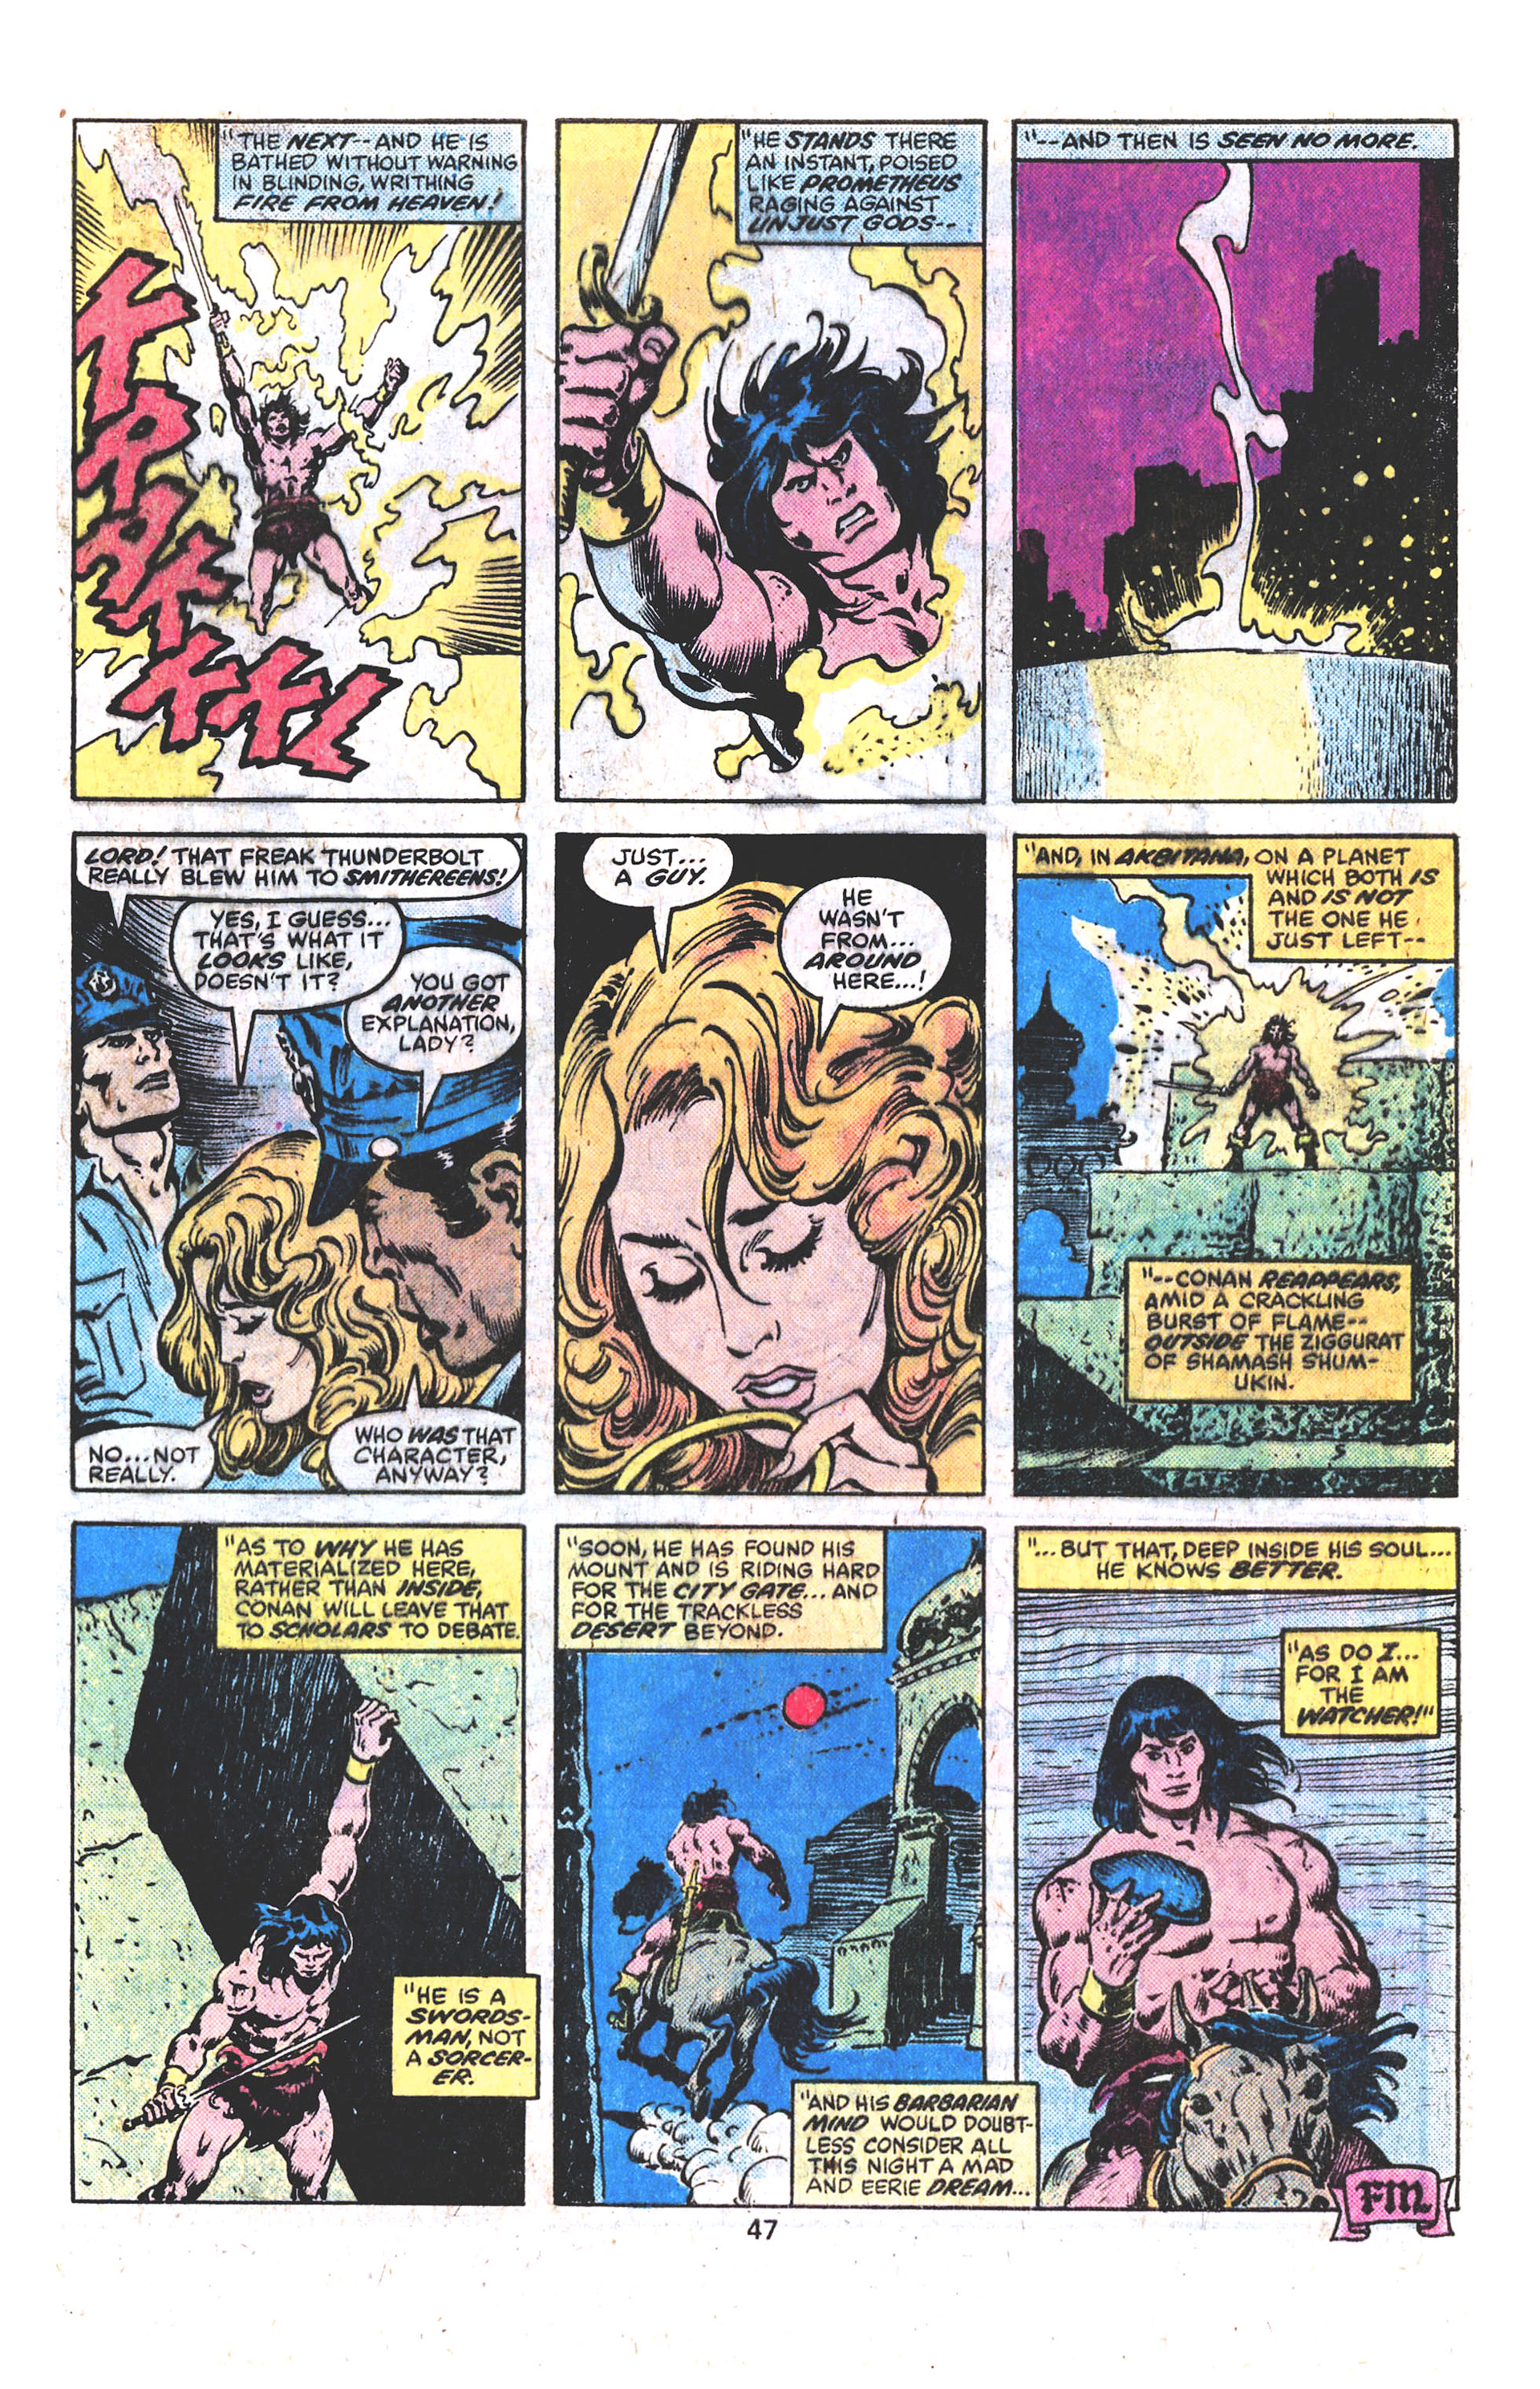 What If? (1977) Issue #13 - Conan The Barbarian walked the Earth Today #13 - English 36